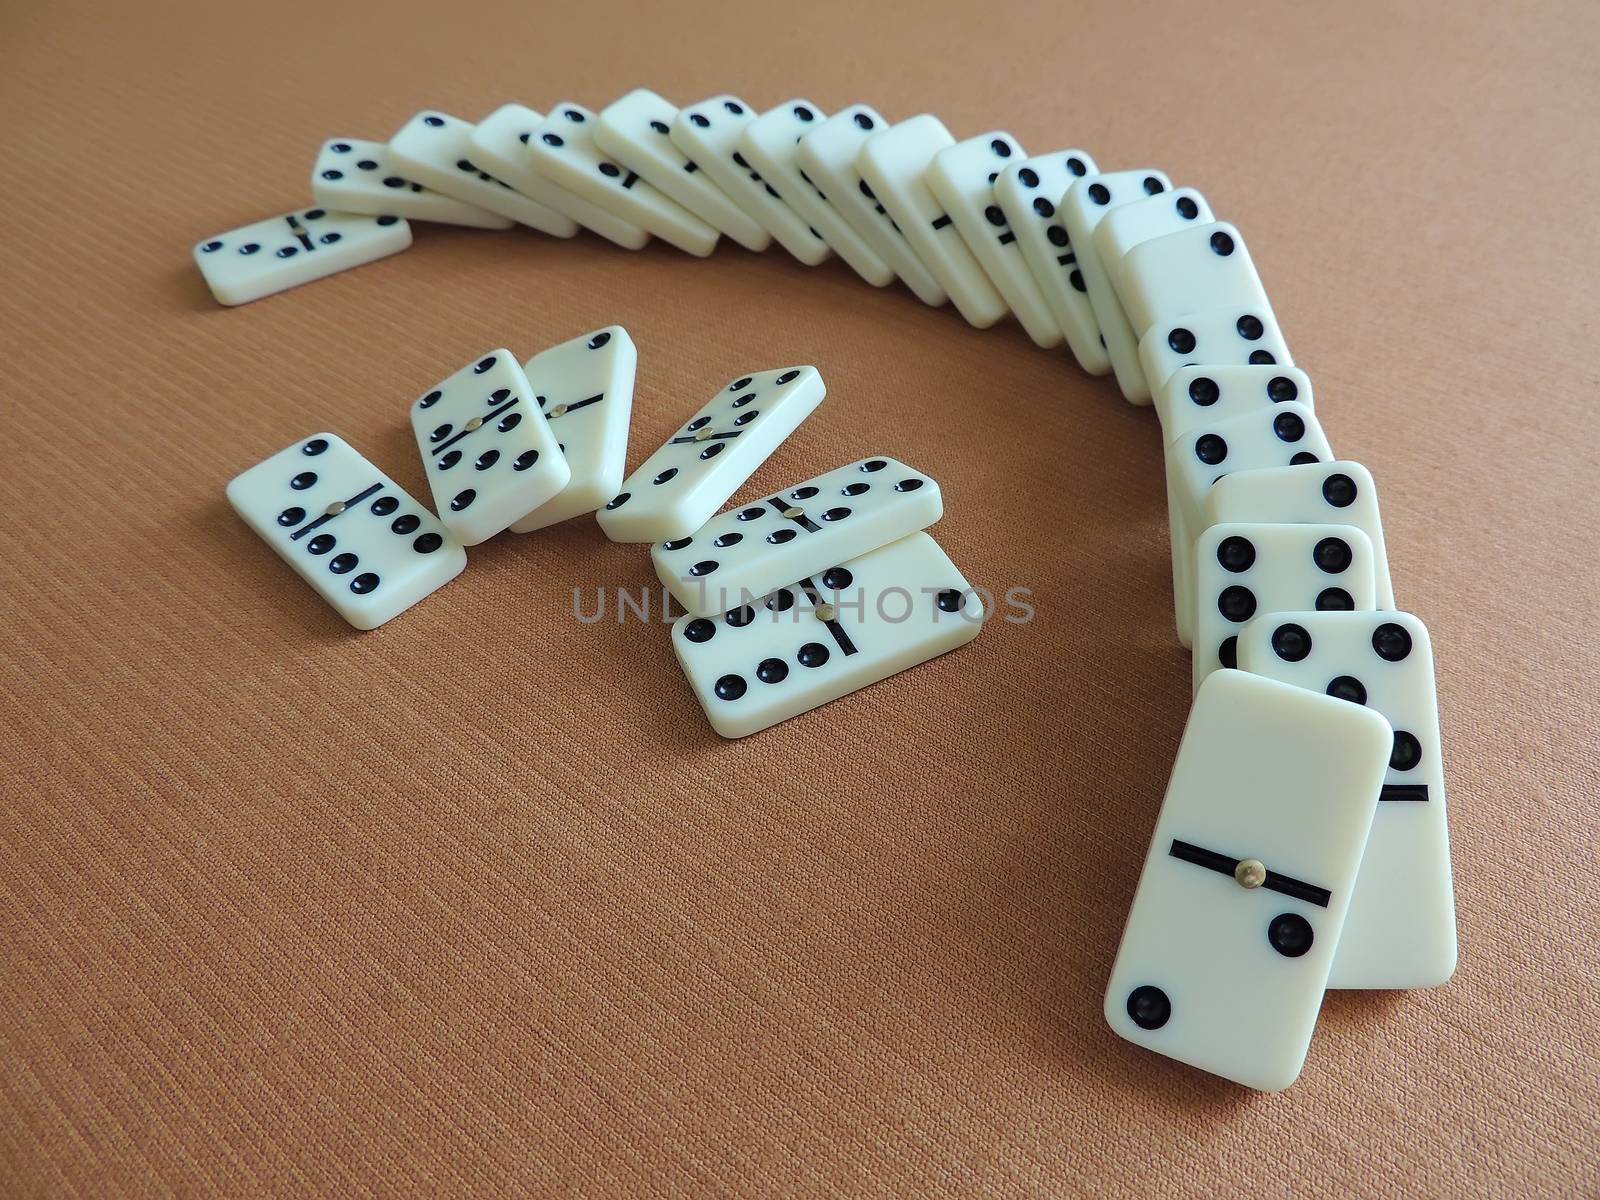 The Falling Domino Prinsiple. The Domino principle. The game of dominoes.